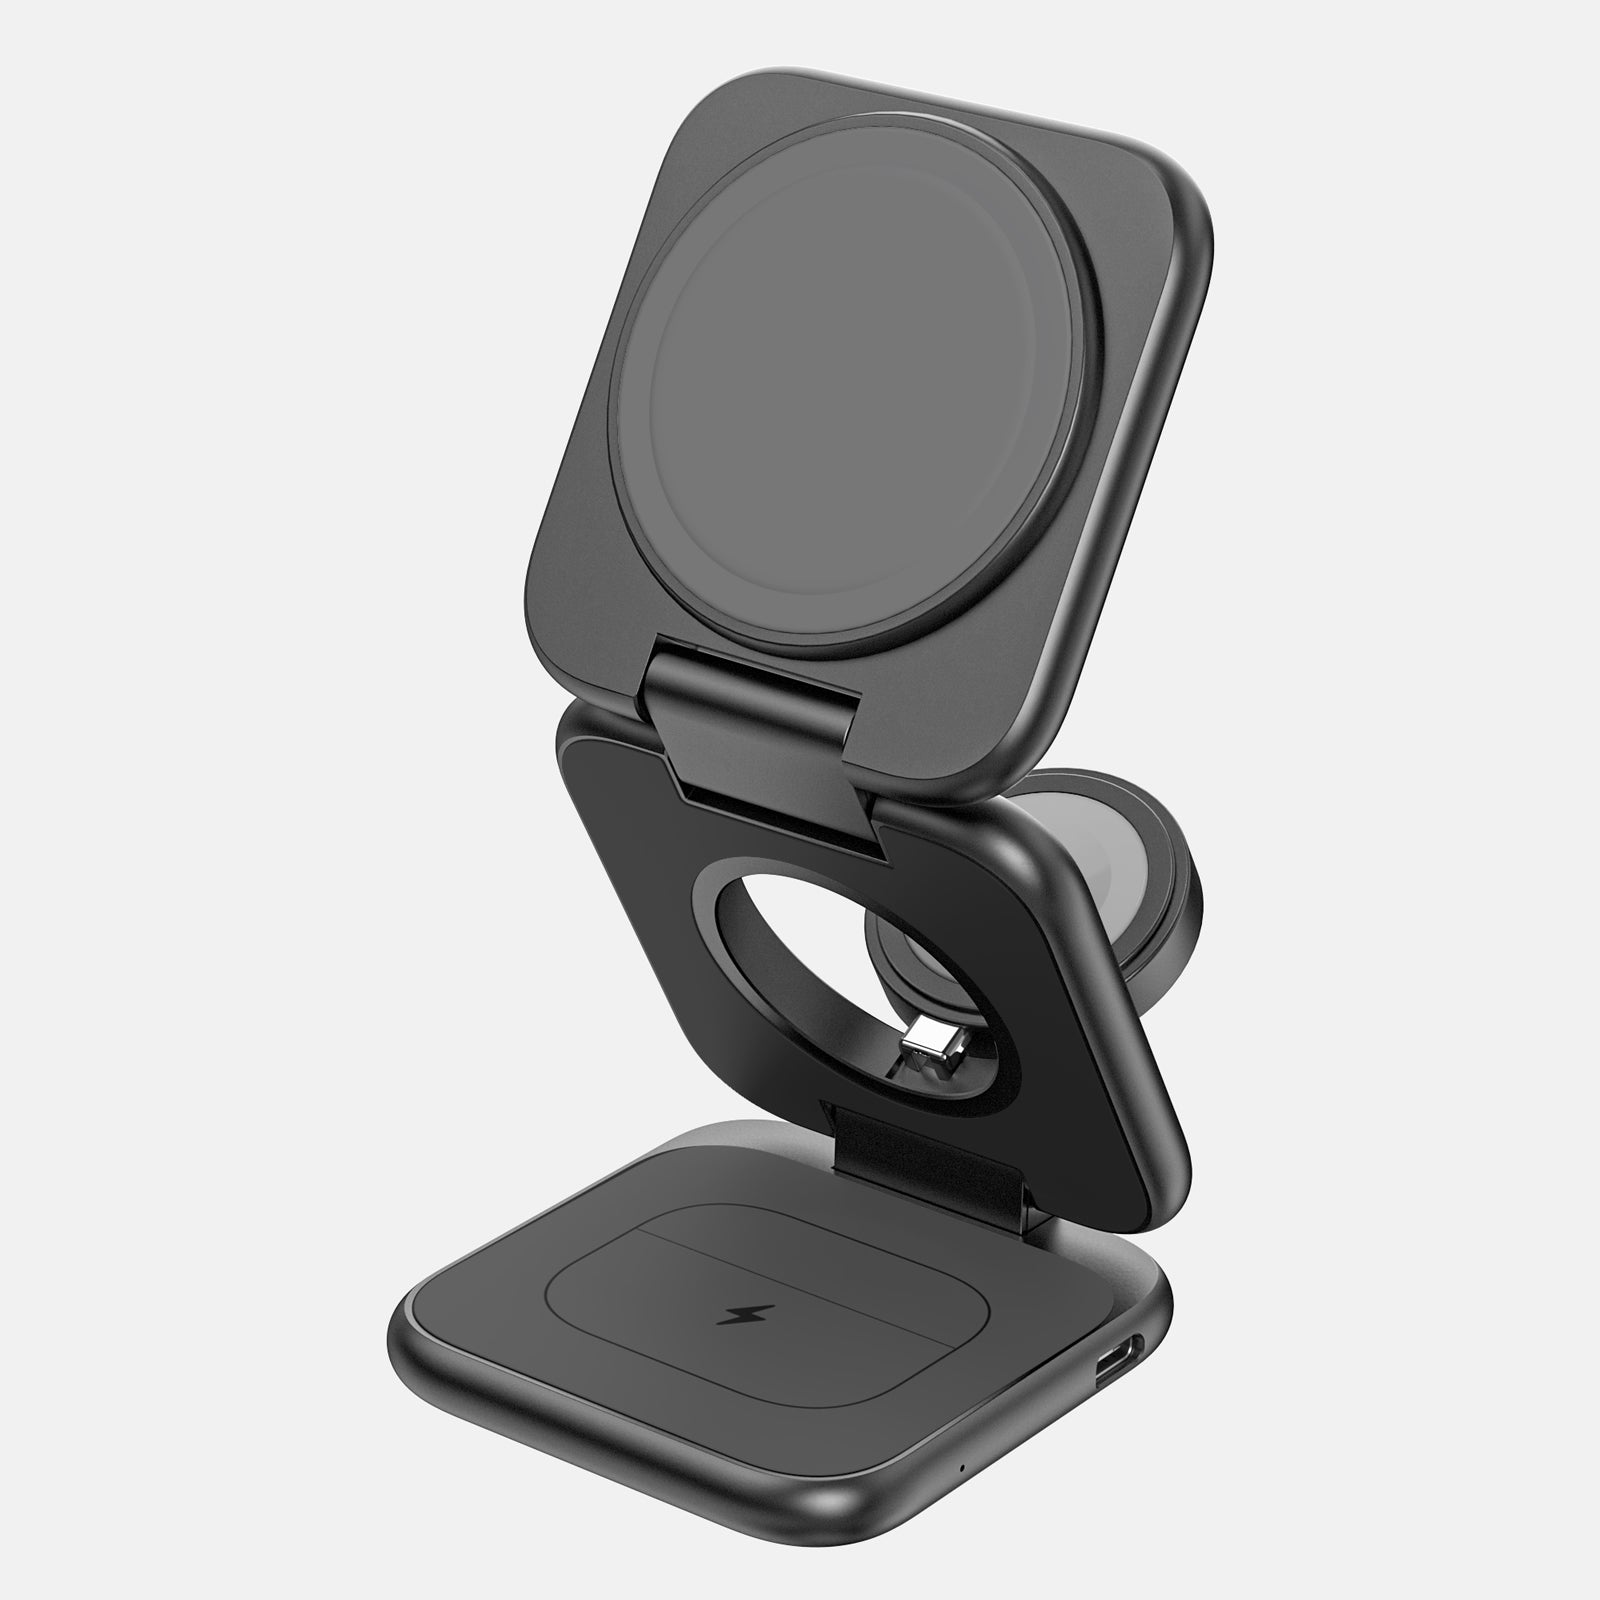 KUXIU X55Plus 3-In-1 Foldable Magnetic Wireless Charger & Stand Kit